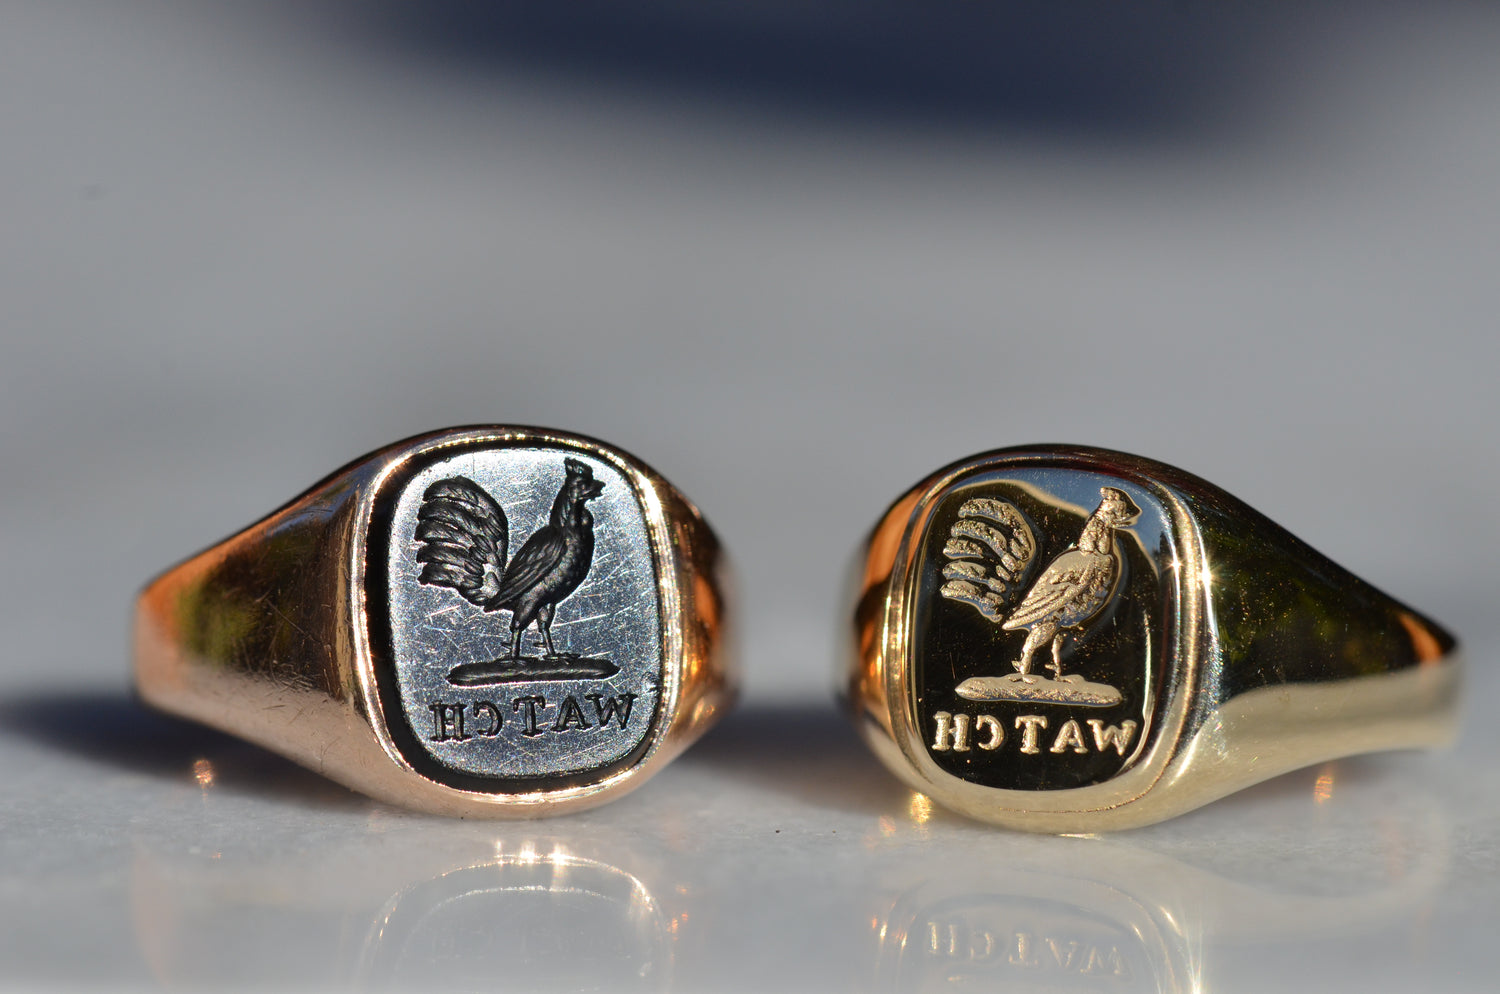 side by side are an original vintage signet ring with carved onyx and the new solid gold double made from its mold: both feature an intaglio of a cockerel and the word WATCH